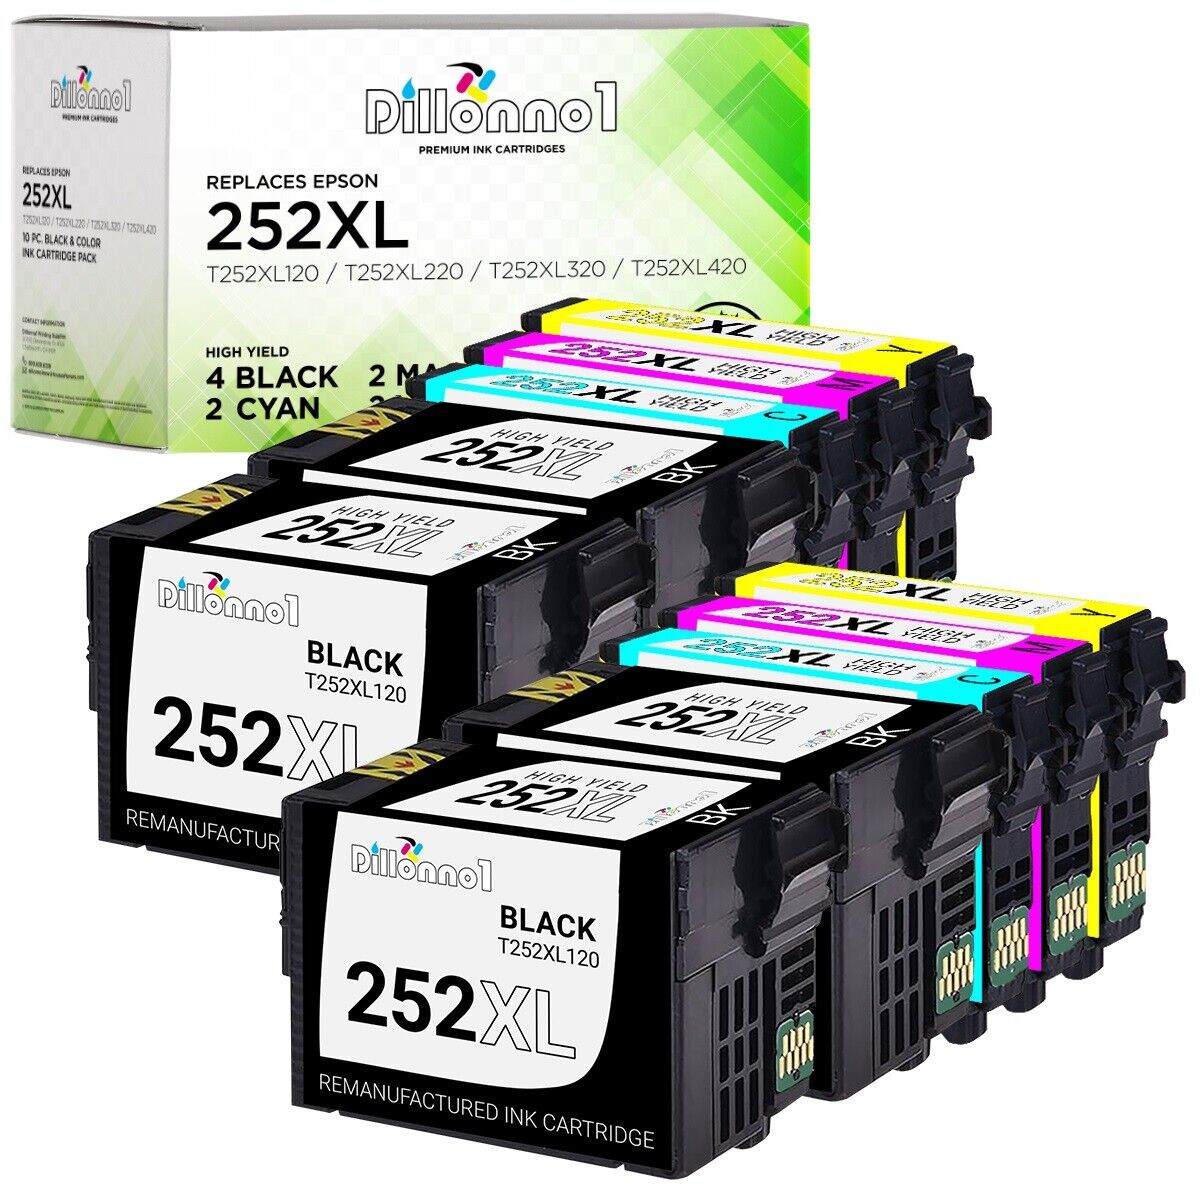 Ink Cartridge for Epson T252XL fits WorkForce 3620 3640 7110 7610 7620 